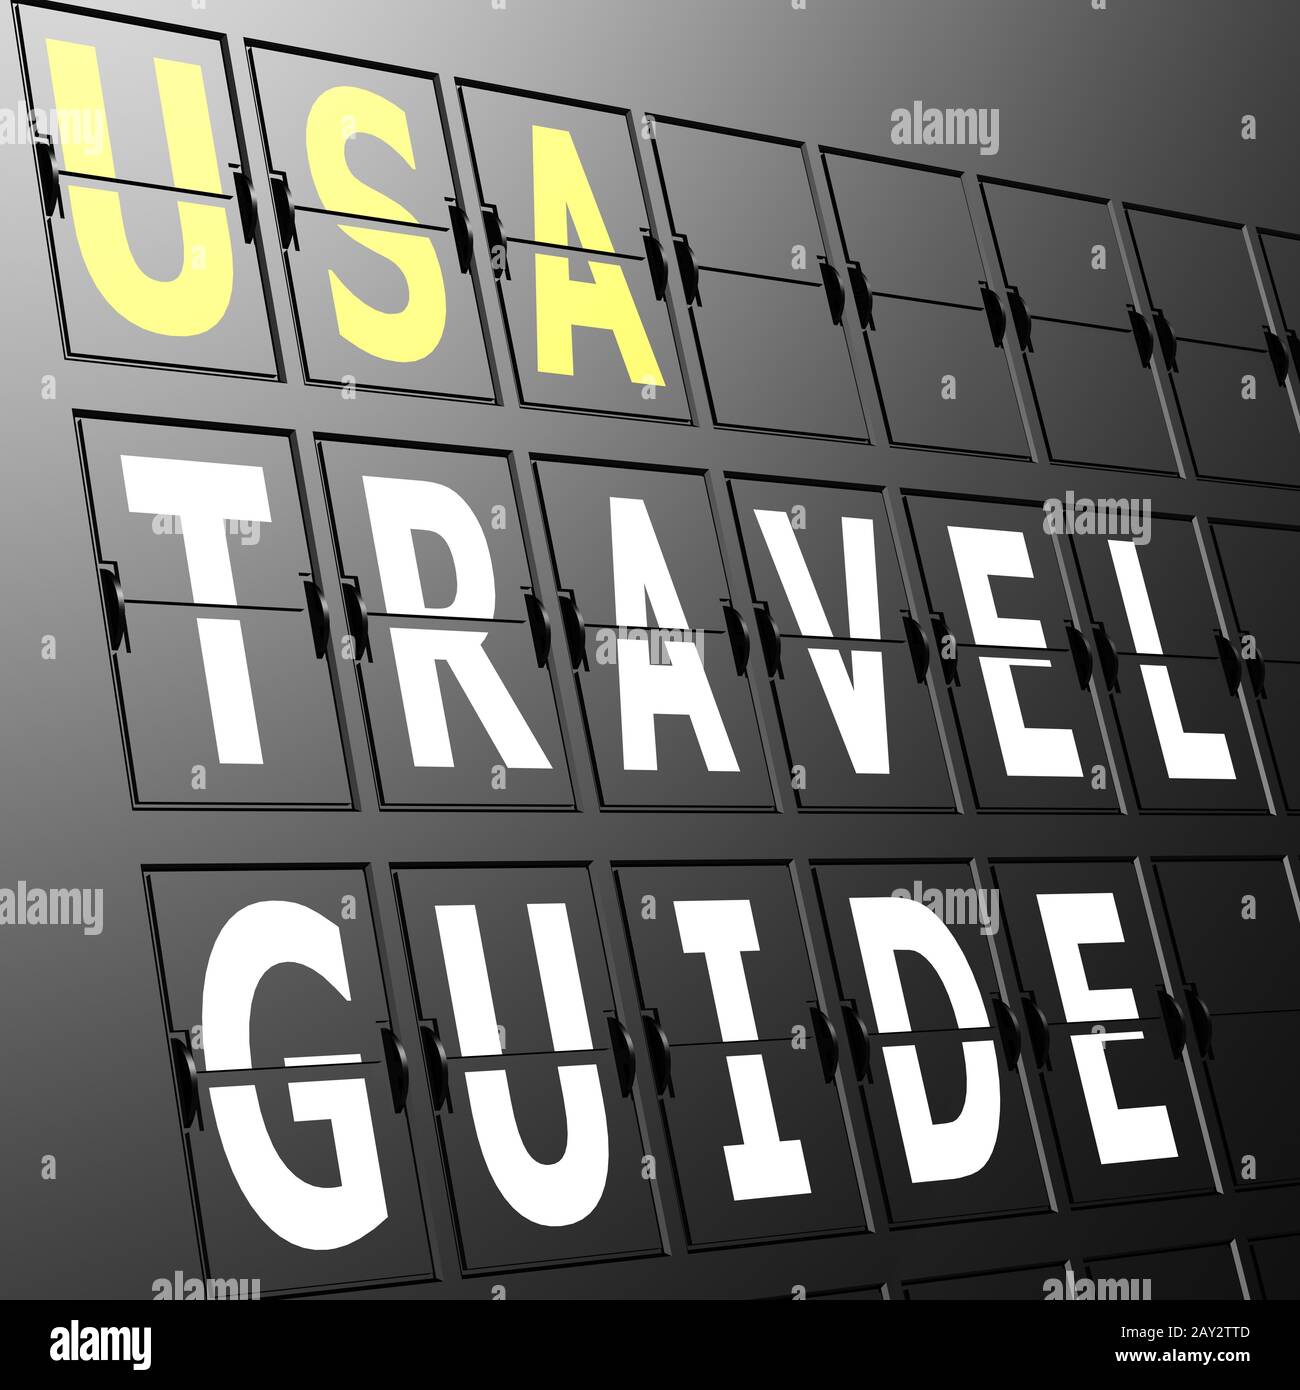 Airport display USA travel guide Stock Photo